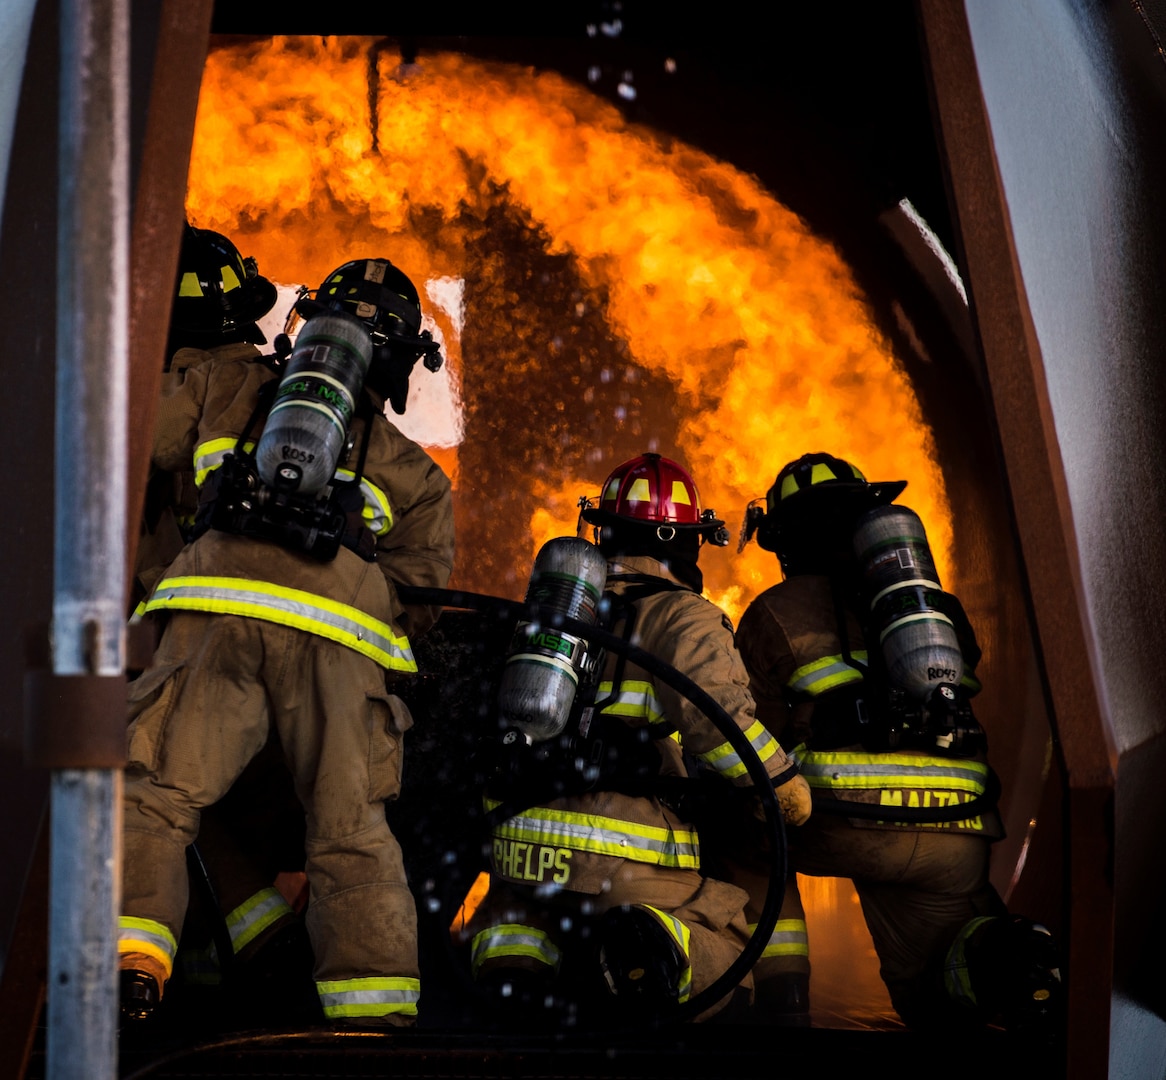 Firefighters from Joint Base San Antonio-Randolph extinguish a fire during training April 11, 2018 at the Camp Talon fire training grounds on JBSA-Randolph. The training takes place quarterly and offers an opportunity for new firefighters to become more confident while fighting fires, but it also gives seasoned Airmen a chance to sharpen their skills and get a head start to the next step in their careers.